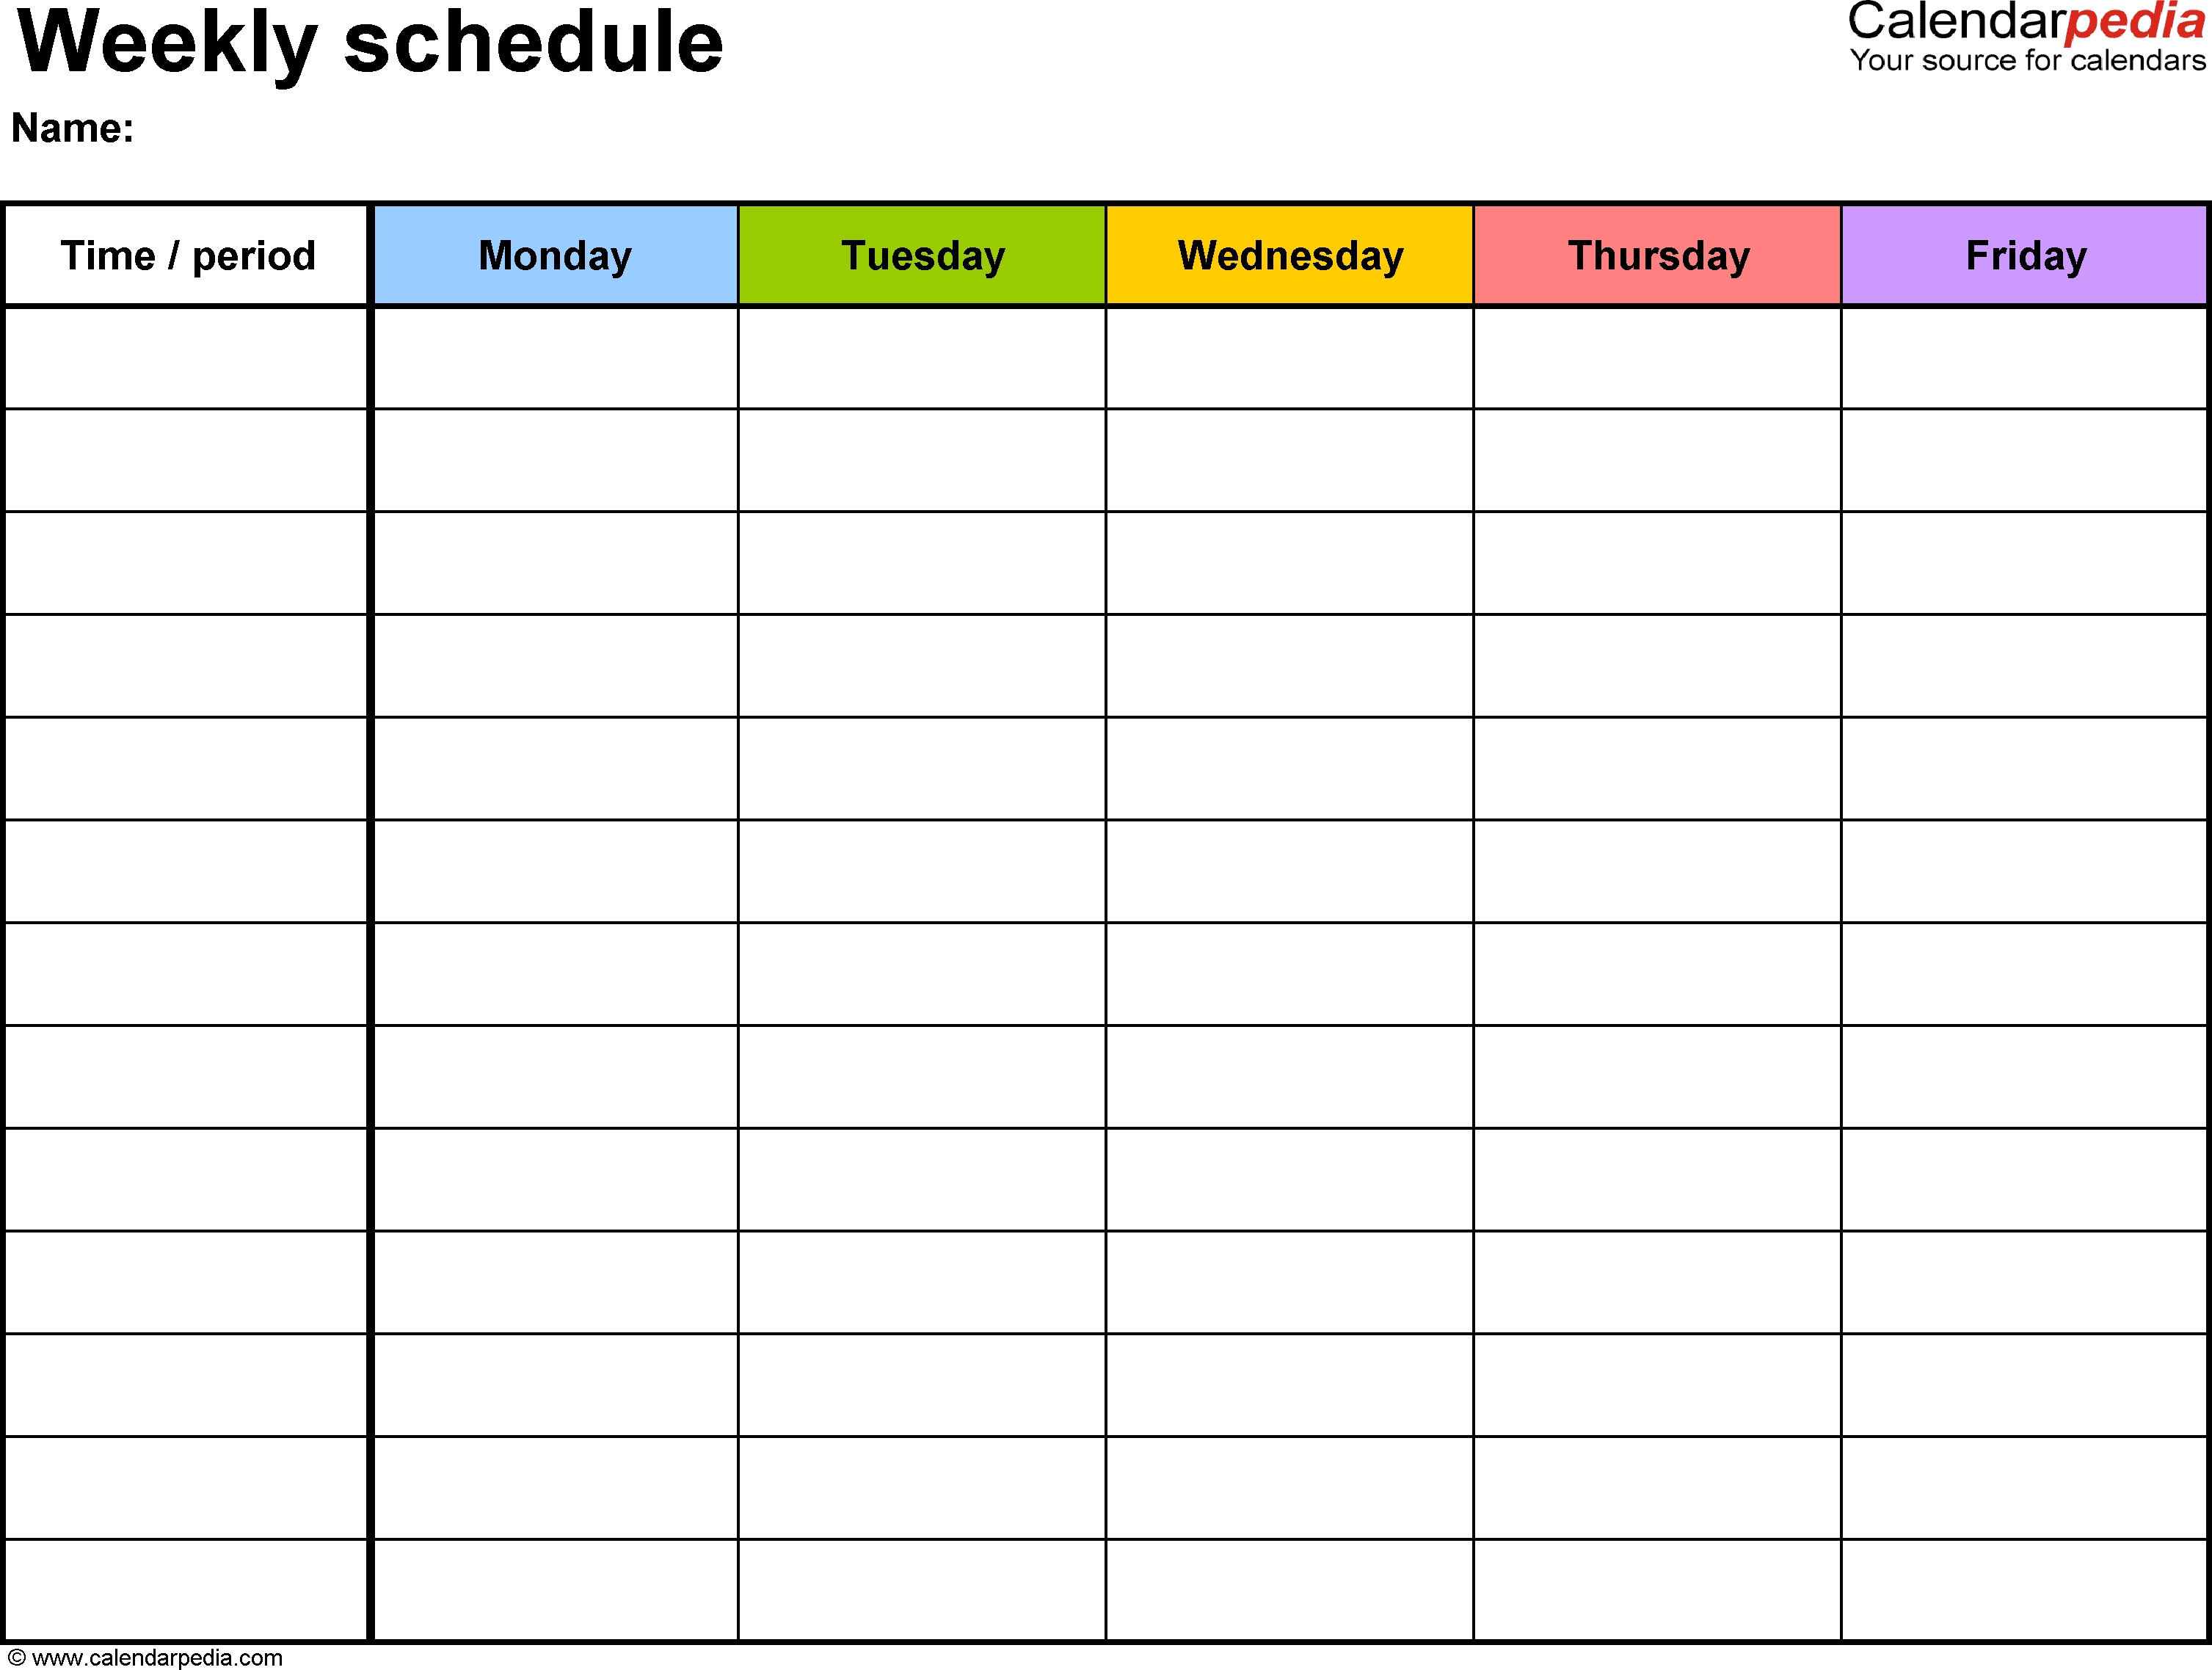 Free Weekly Schedule Templates For Word - 18 Templates within 7 Day Calendar Template Free